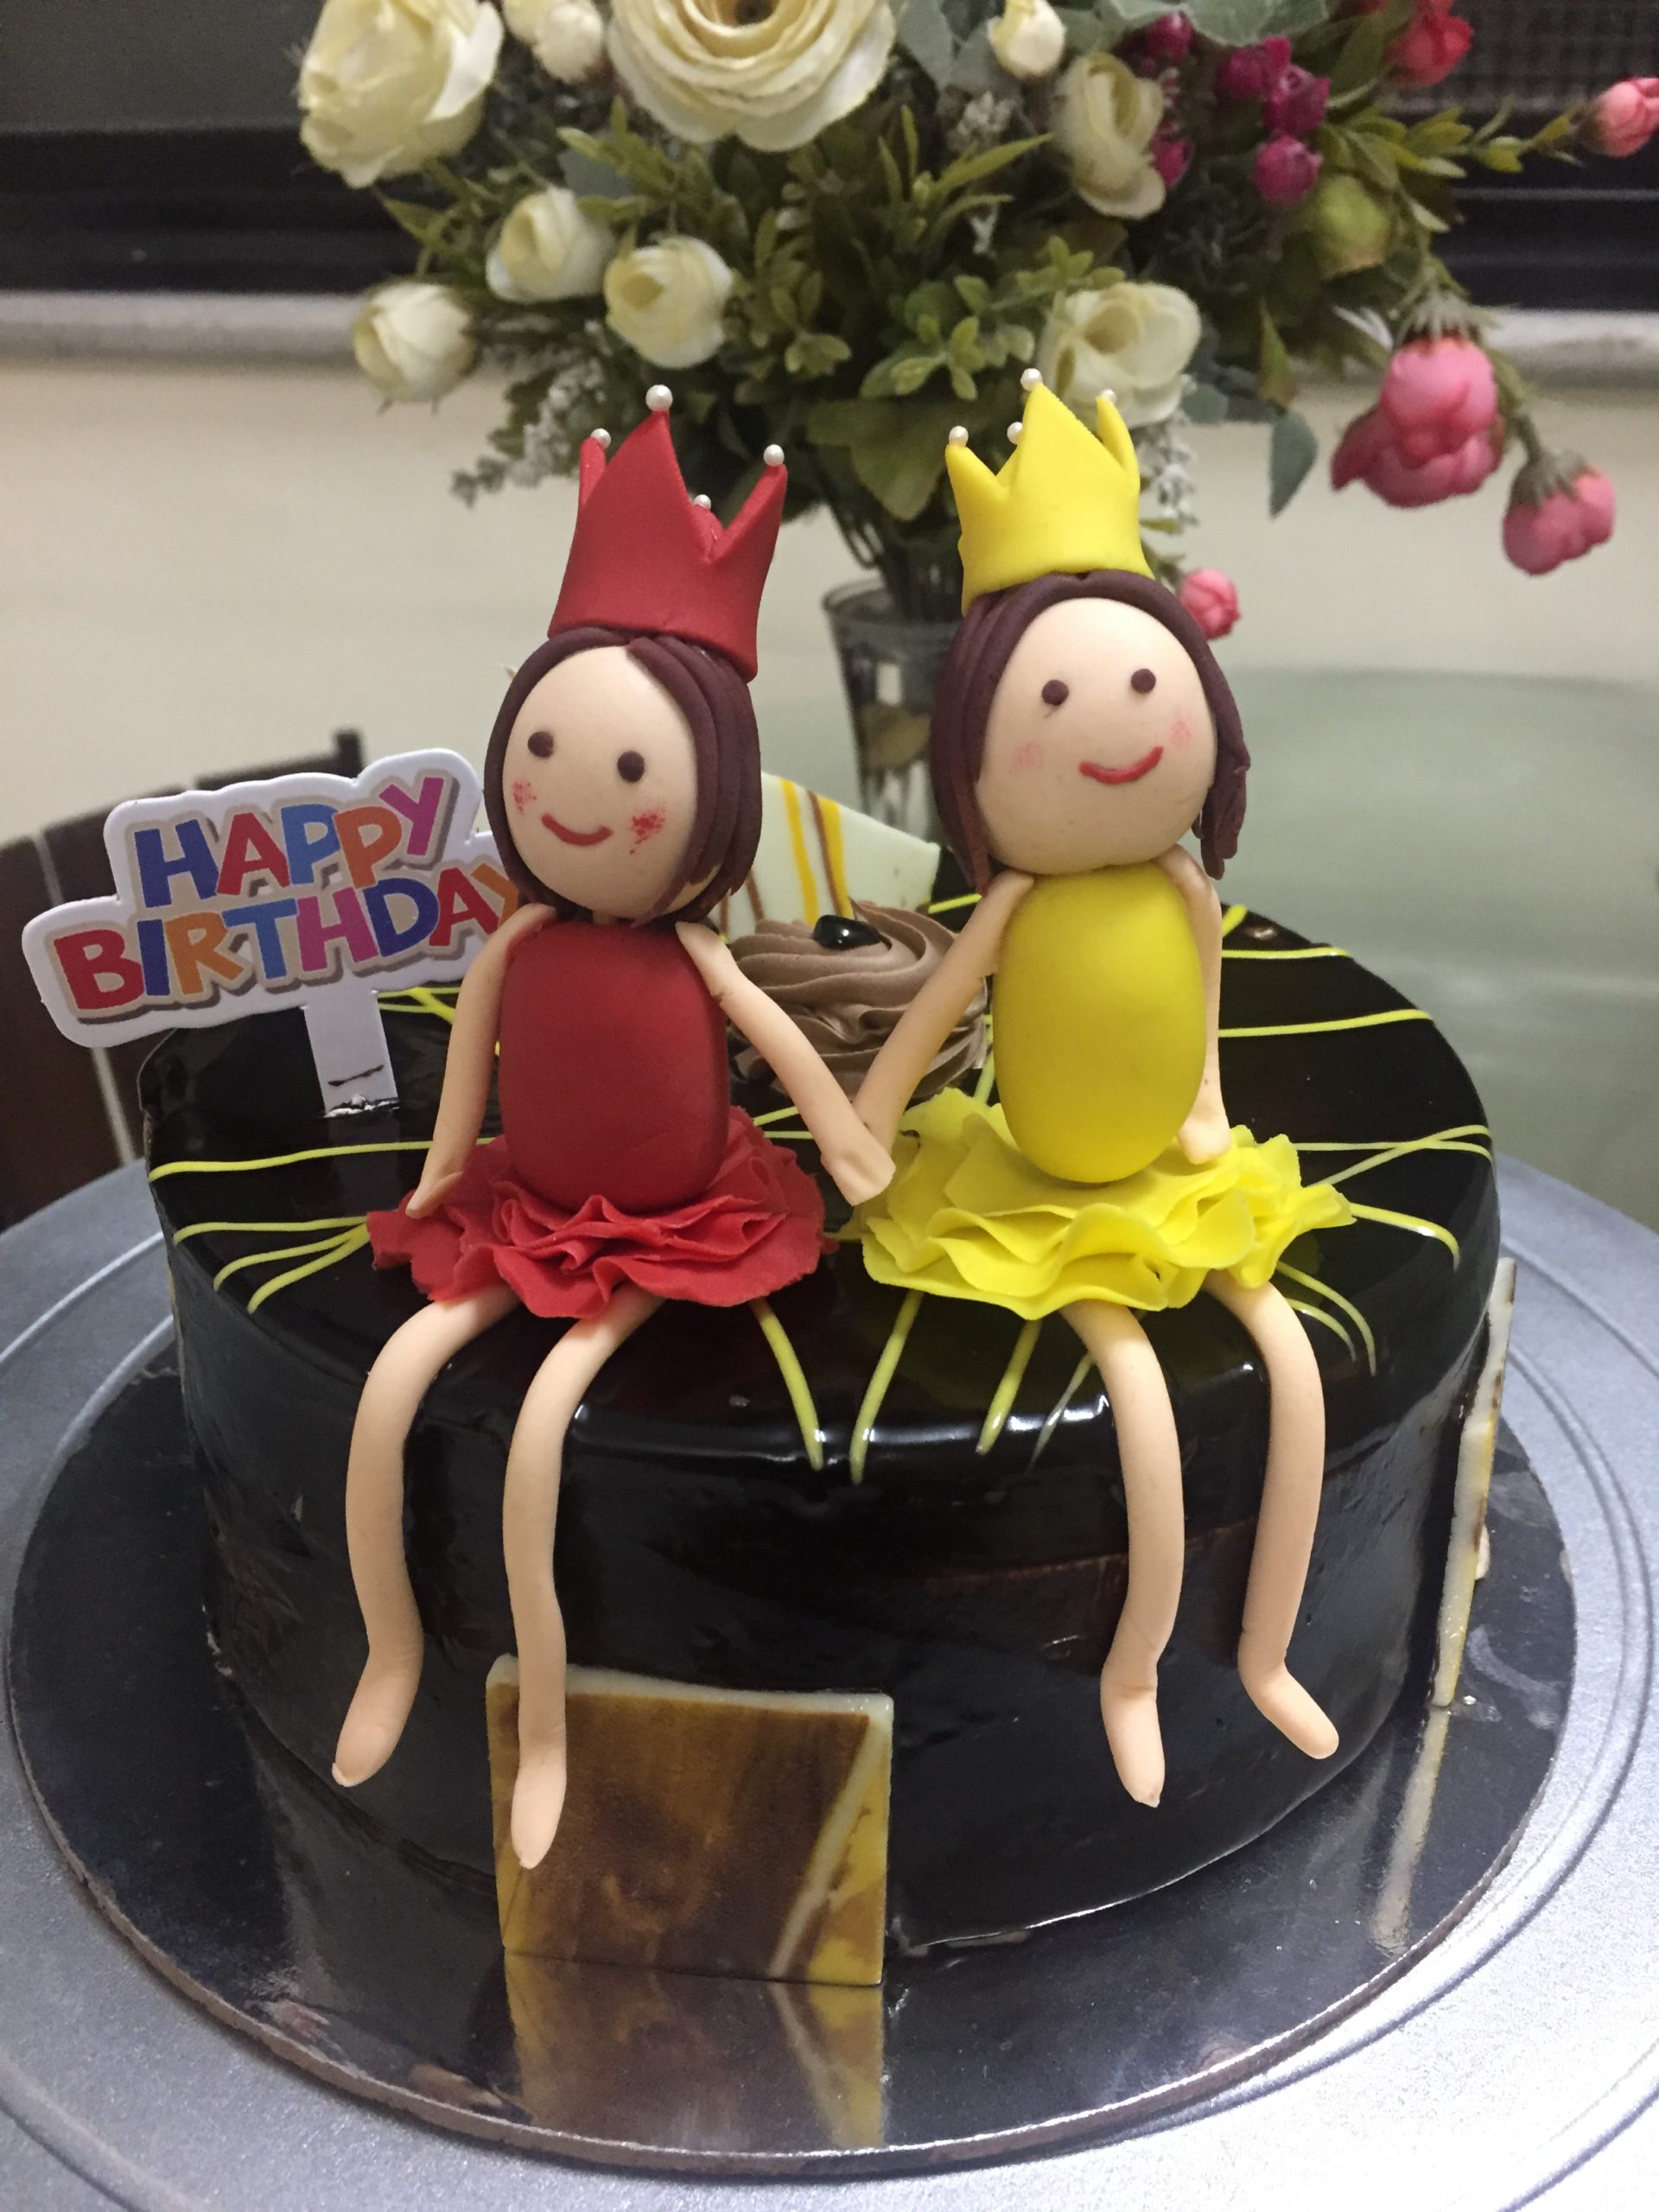 Doll cake Designs, Images, Price Near Me